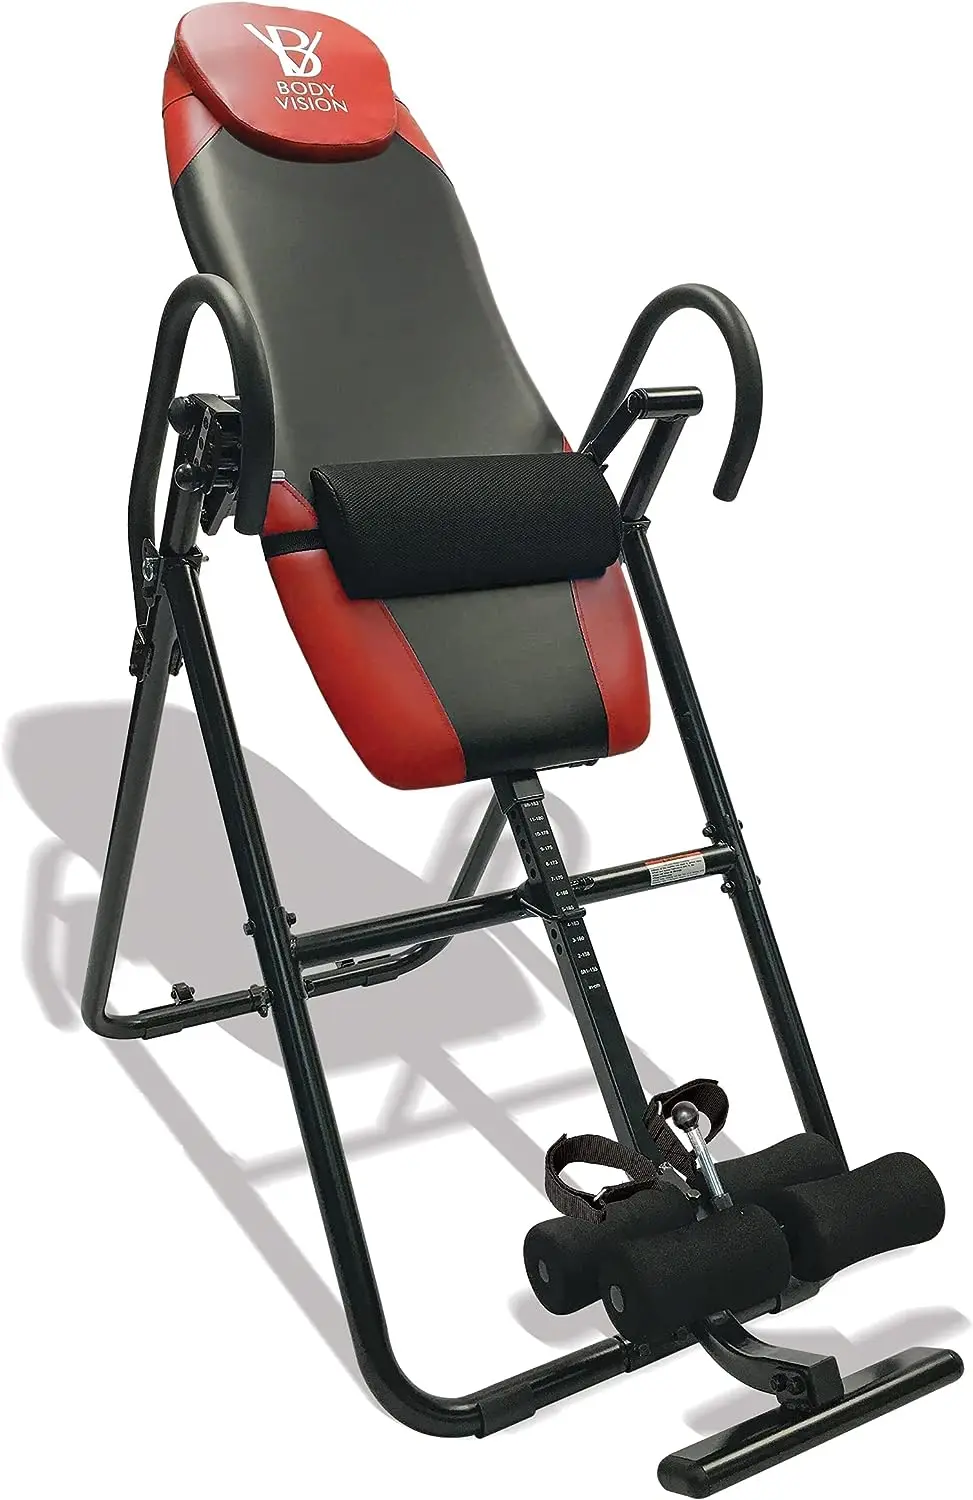 

Premium Inversion Table with Removable Pillow & Lumbar Support Pad, - Heavy Duty - up to 250 lbs., Red